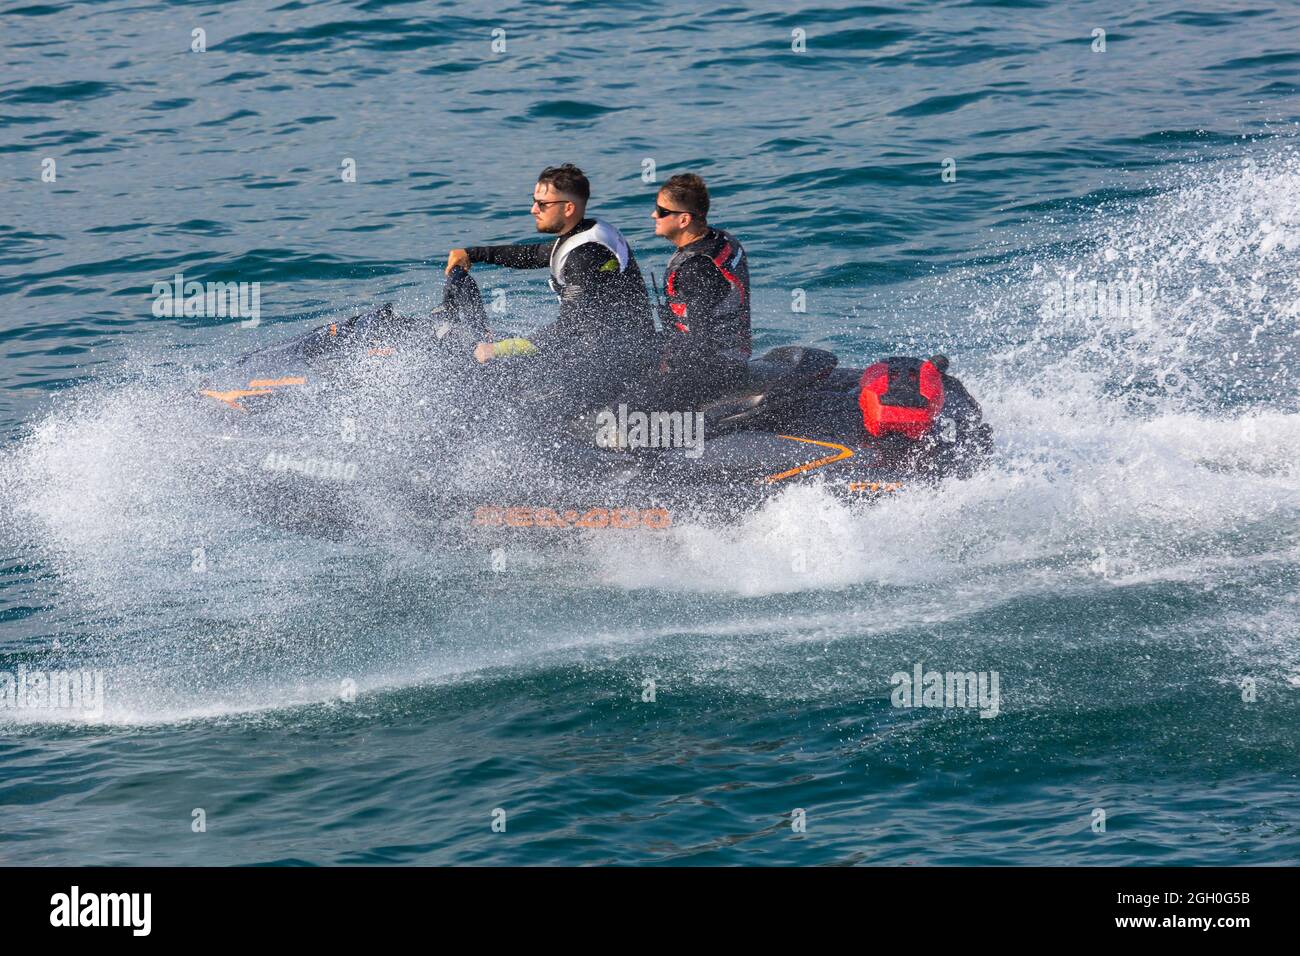 Riding Jet Skis High Resolution Stock Photography and Images - Alamy